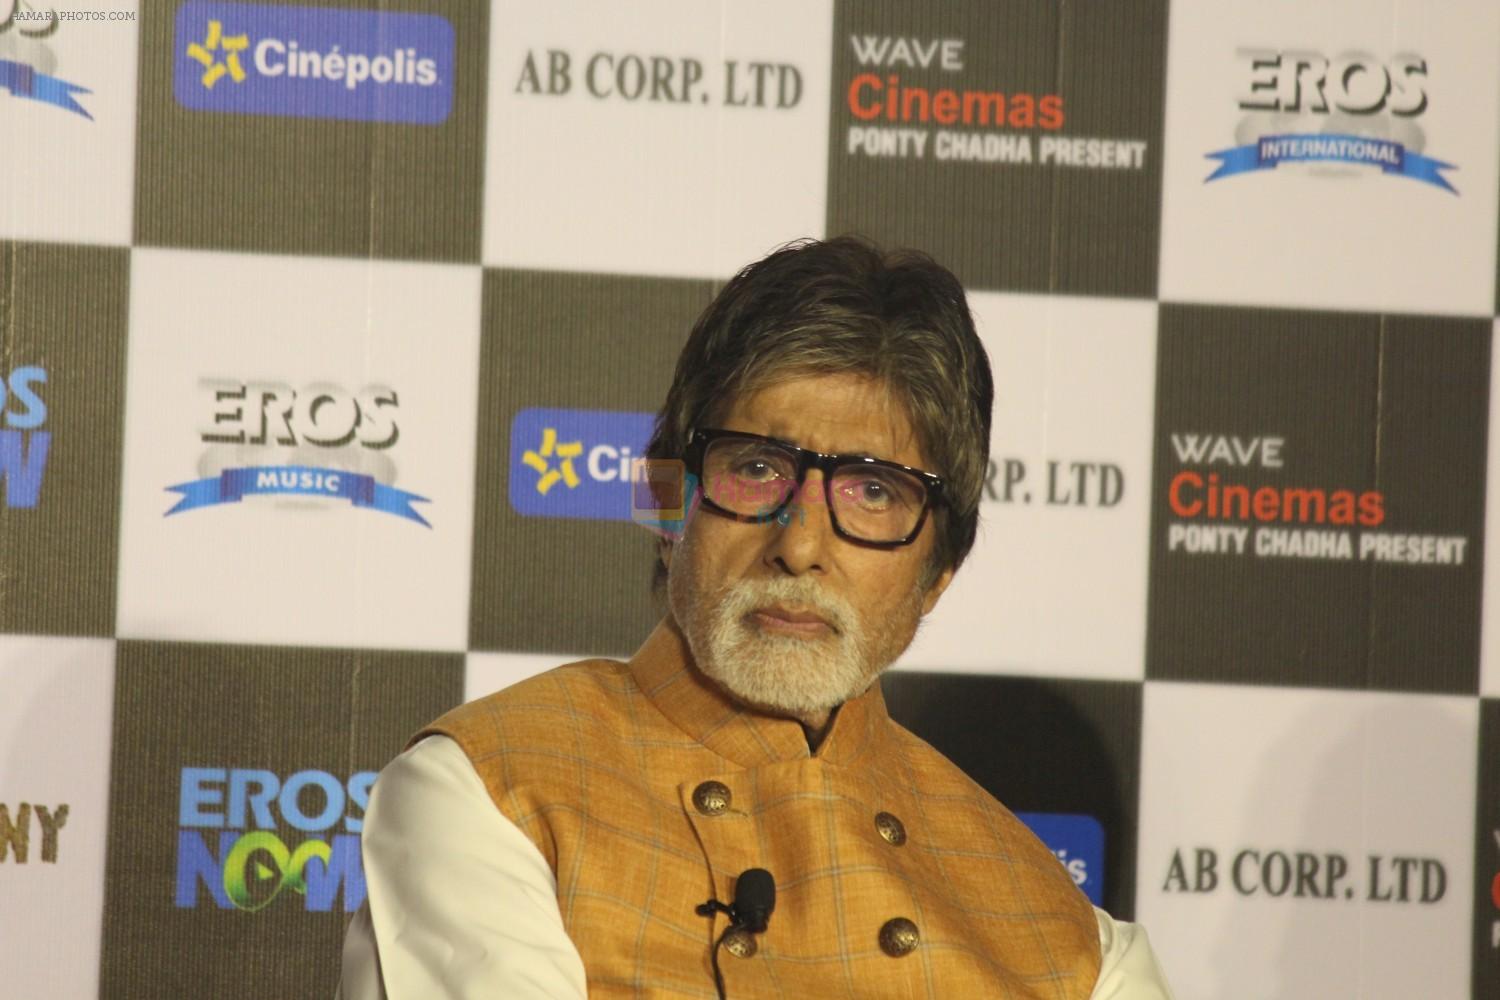 Amitabh Bachchan at the Trailer Launch Of Film Sarkar 3 on 2nd March 2017